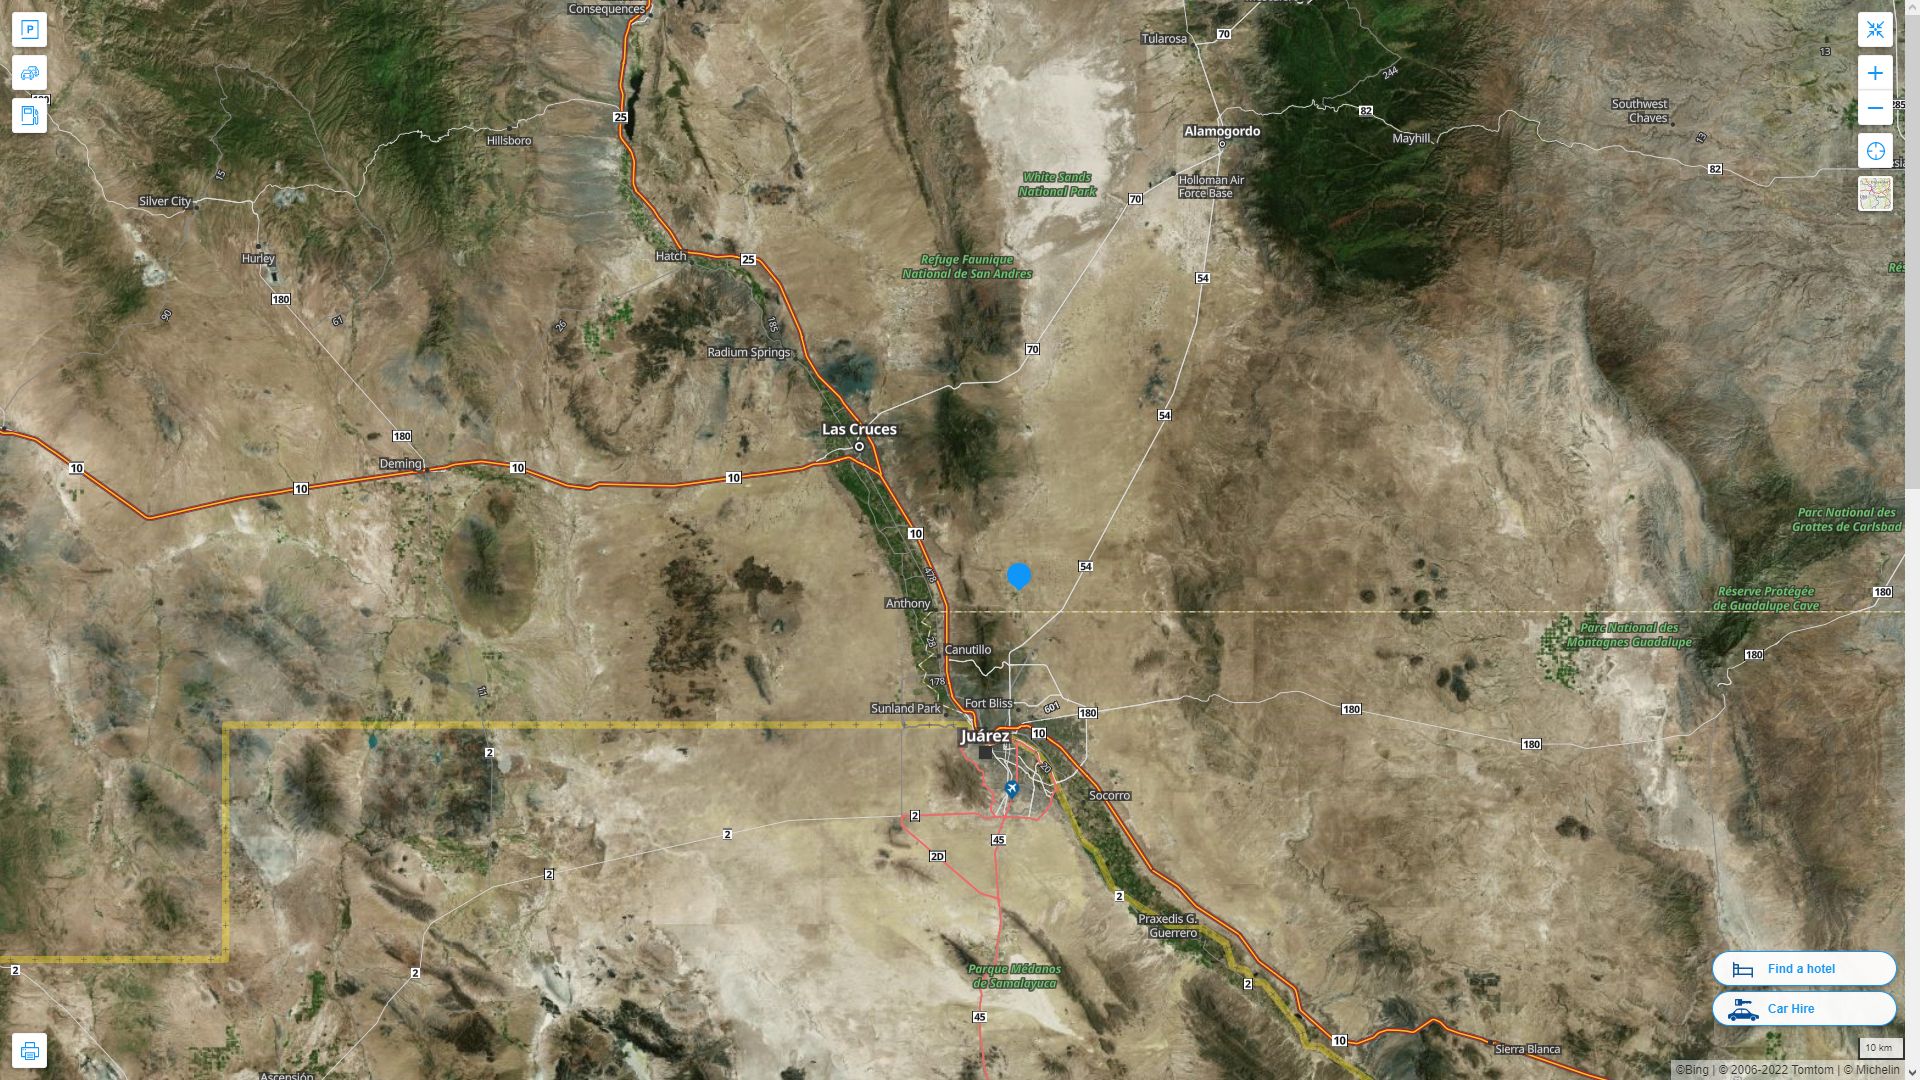 Chaparral New Mexico Highway and Road Map with Satellite View